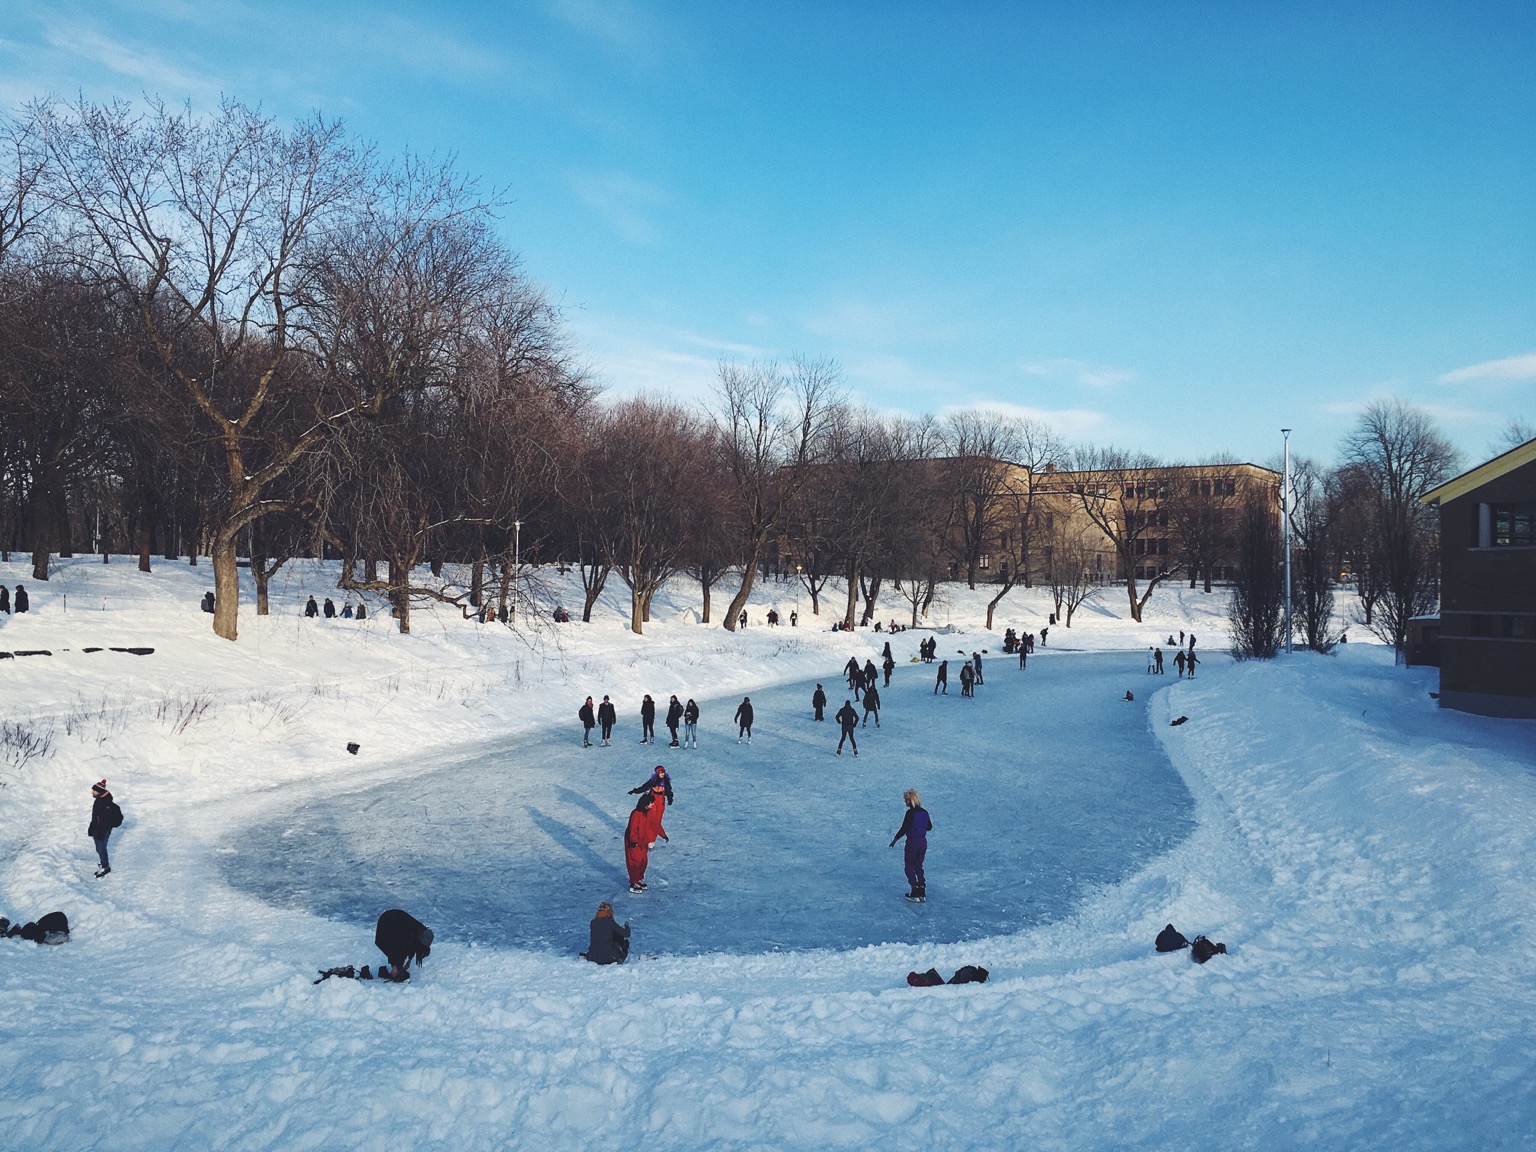 People ice skating on the lake of Parc La Fontaine in Montréal on a winter day.